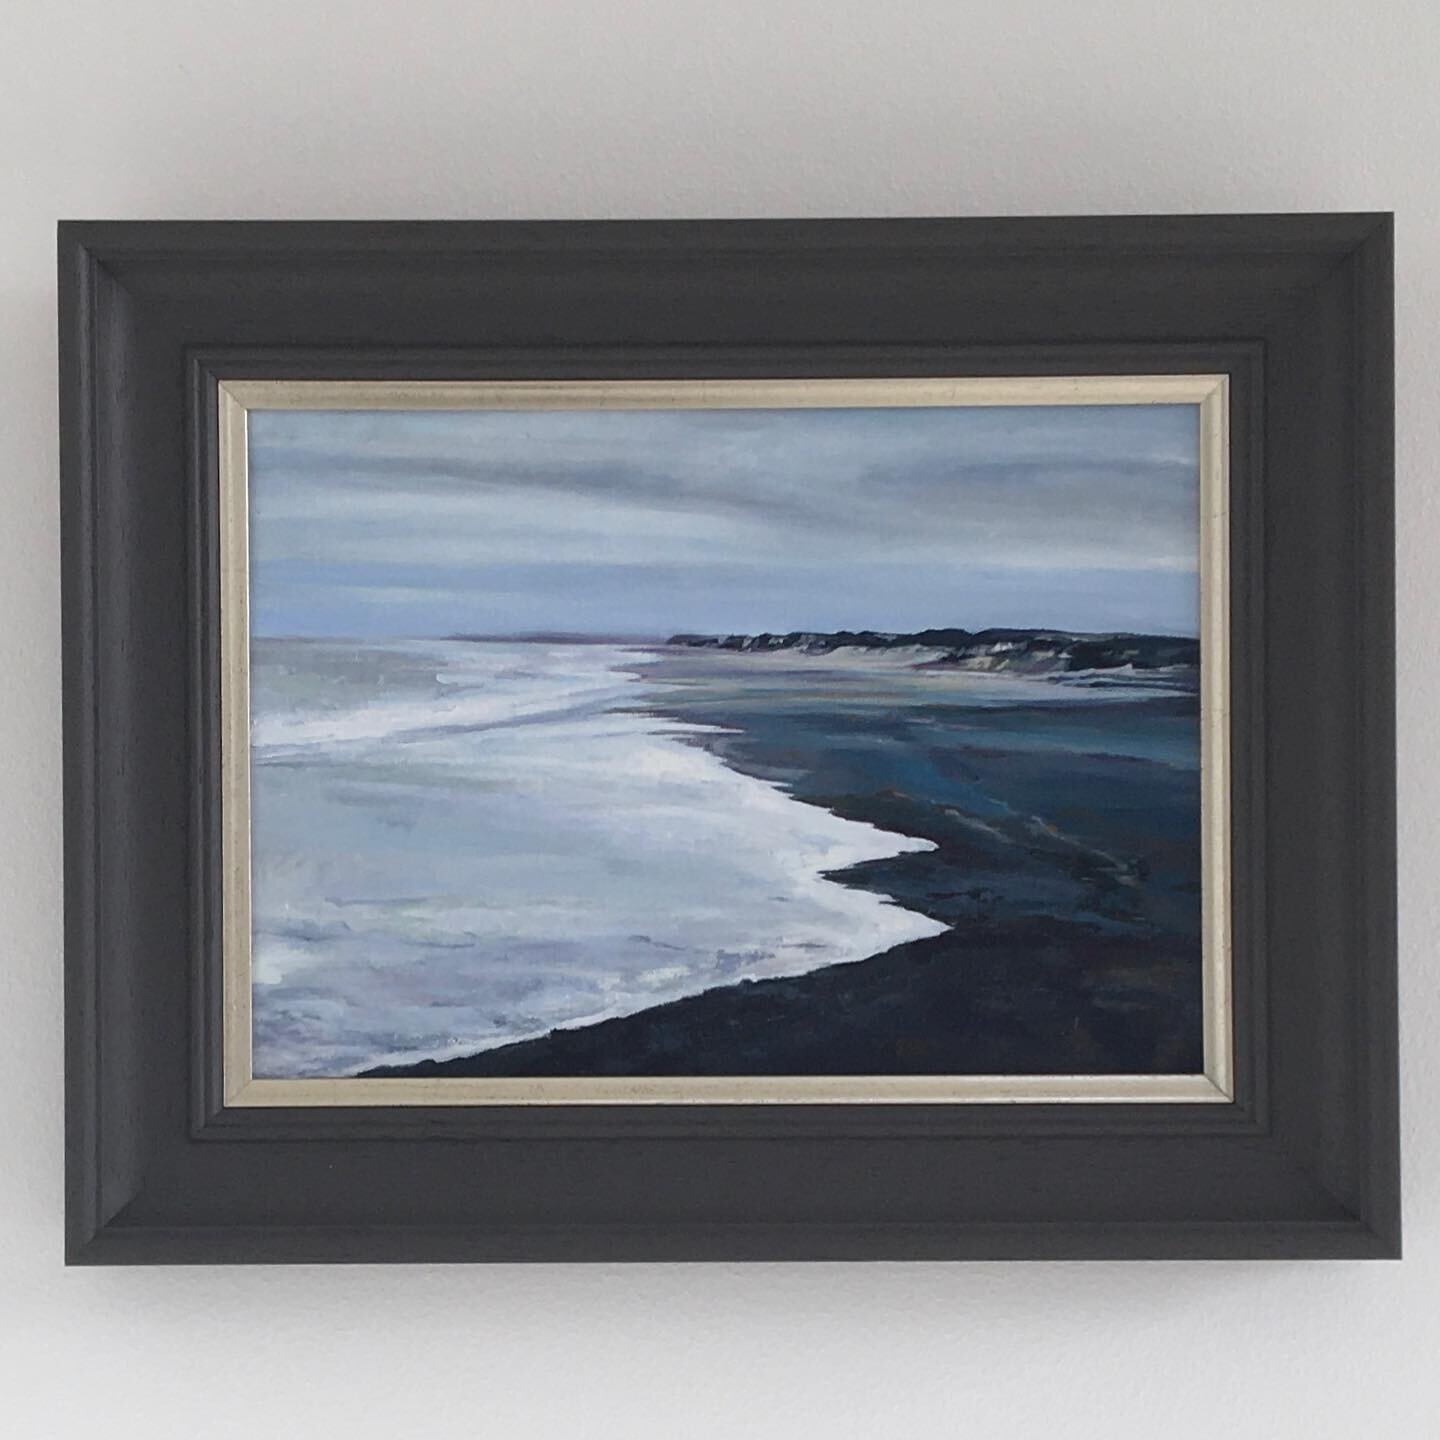 White Sea Oil on Linen &bull; when I painted this I was reminded of how much the sea and particularly the sound of the waves and the sea air has such a calming and healing effect on our senses and well being. 
# British Isles # landscape painting # C